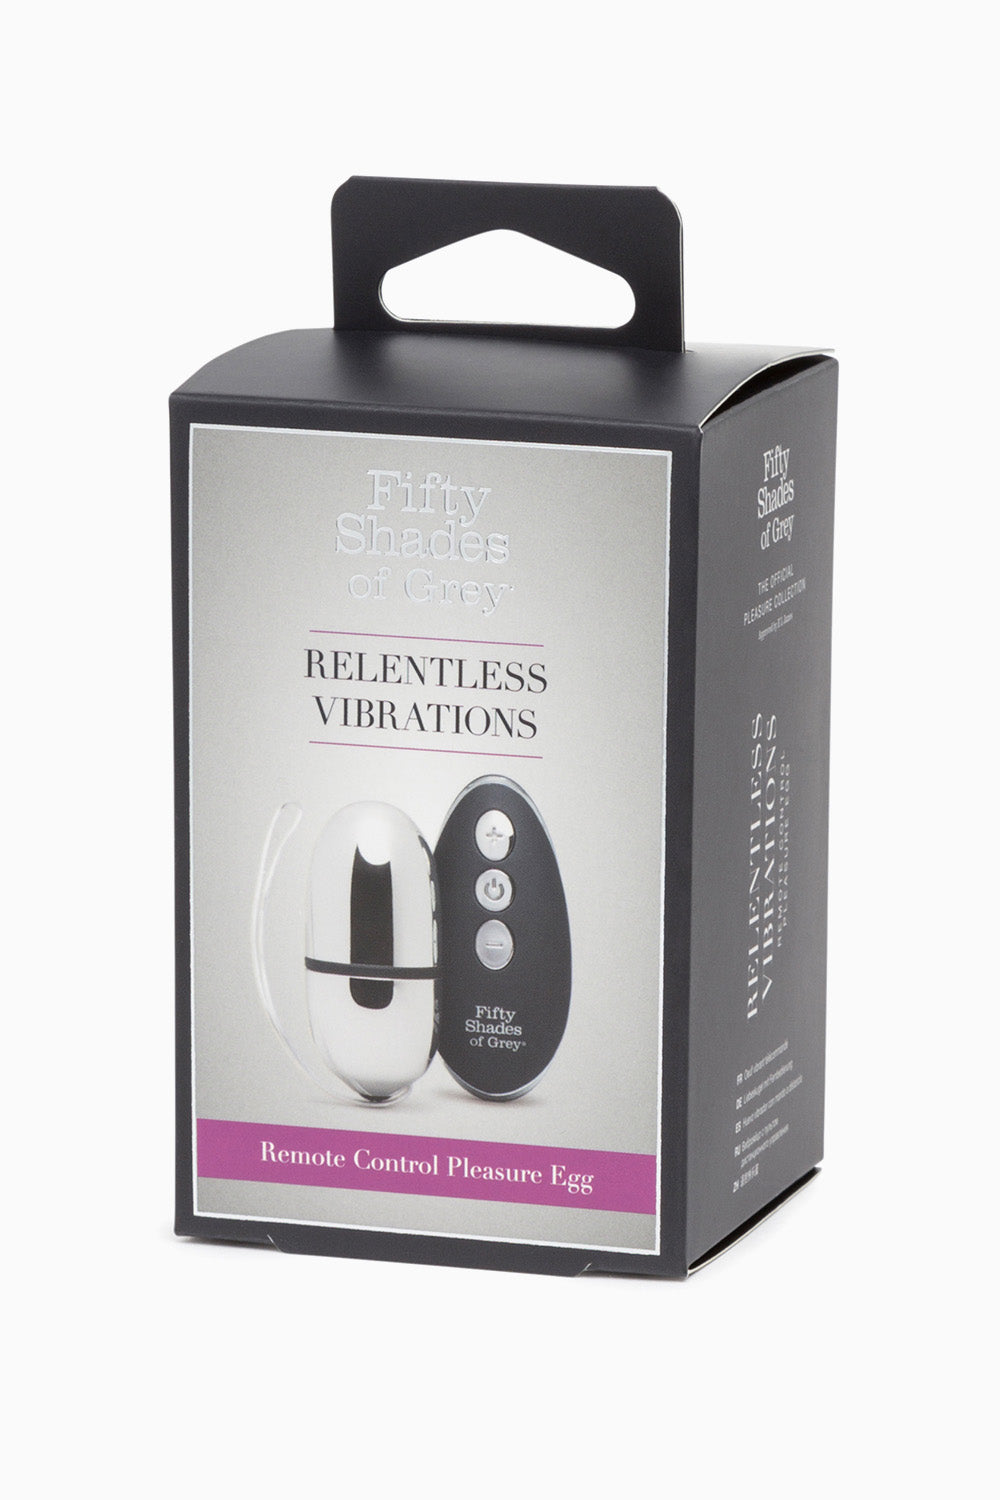 Fifty Shades of Grey Relentless Vibrations Remote Control Pleasure Egg, 4.25 Inches